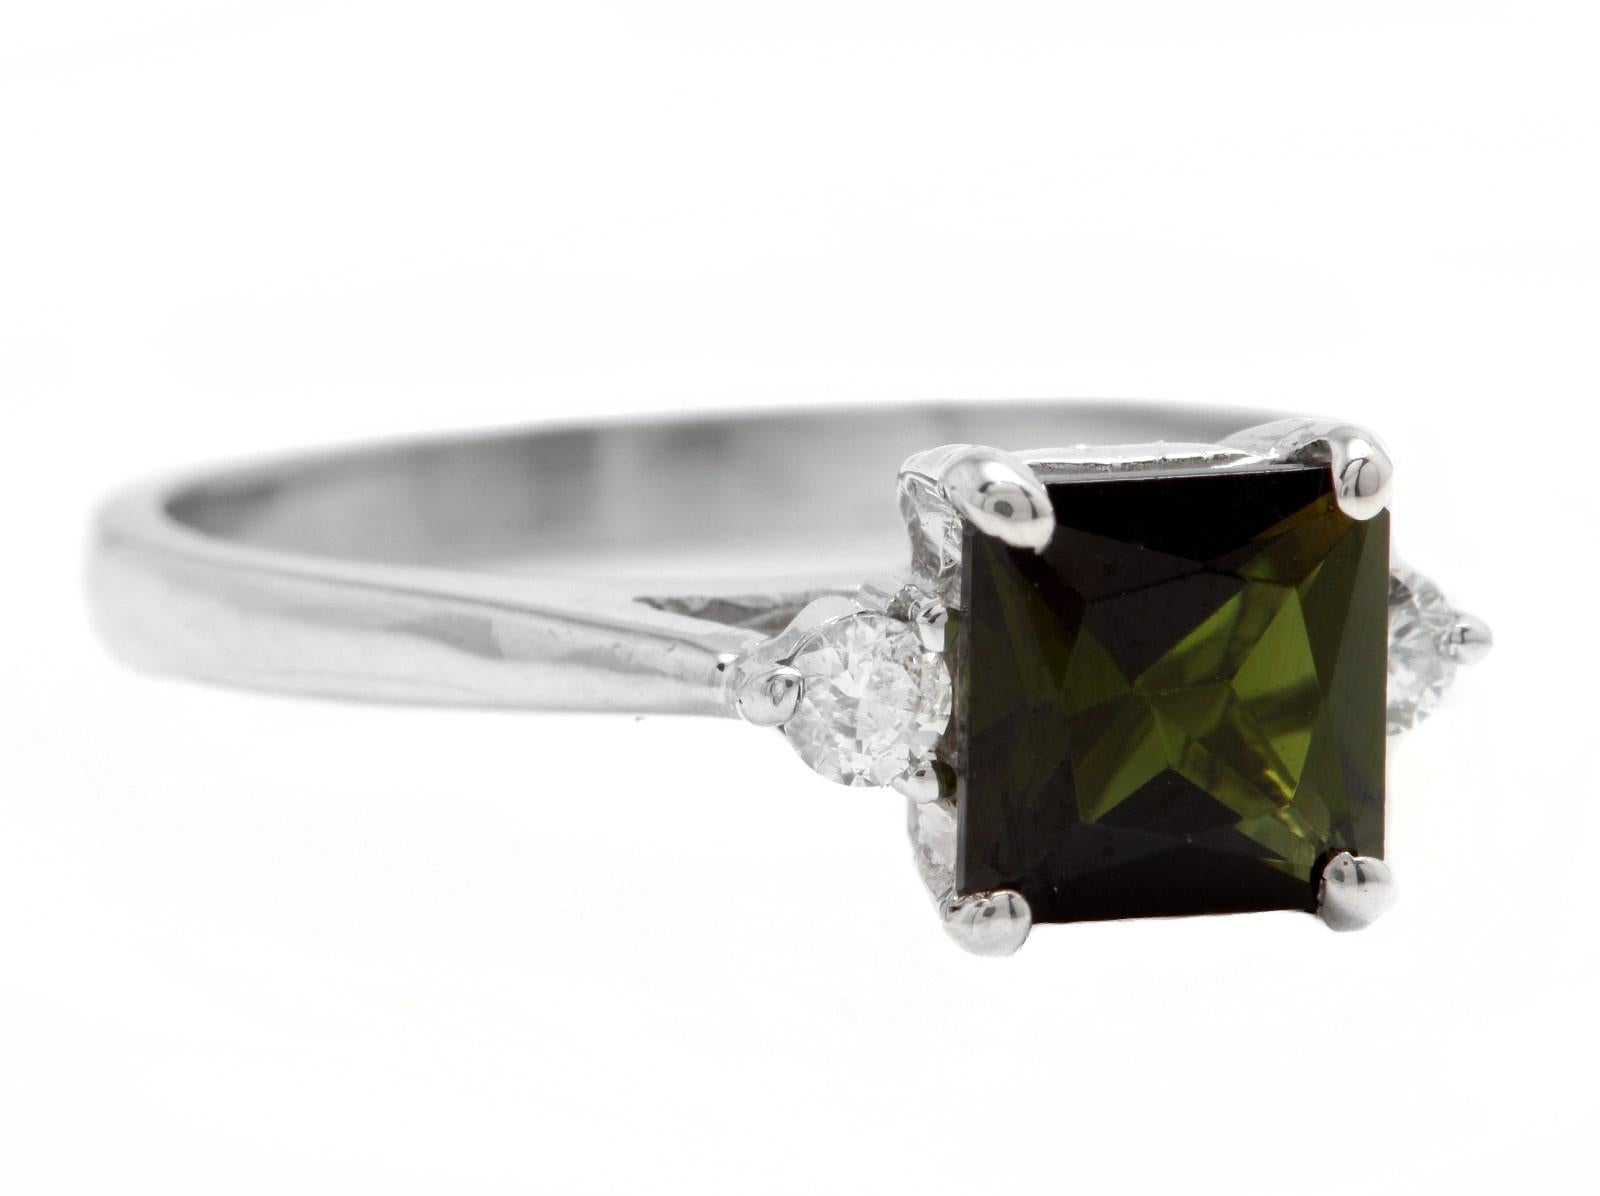 1.25 Carats Natural Very Nice Looking Green Tourmaline and Diamond 14K Solid White Gold Ring

Suggested Replacement Value:  $2,800.00

Total Natural Princess Cut Tourmaline Weight is: Approx. 1.15 Carats 

Tourmaline Measures: Approx. 6.00 x